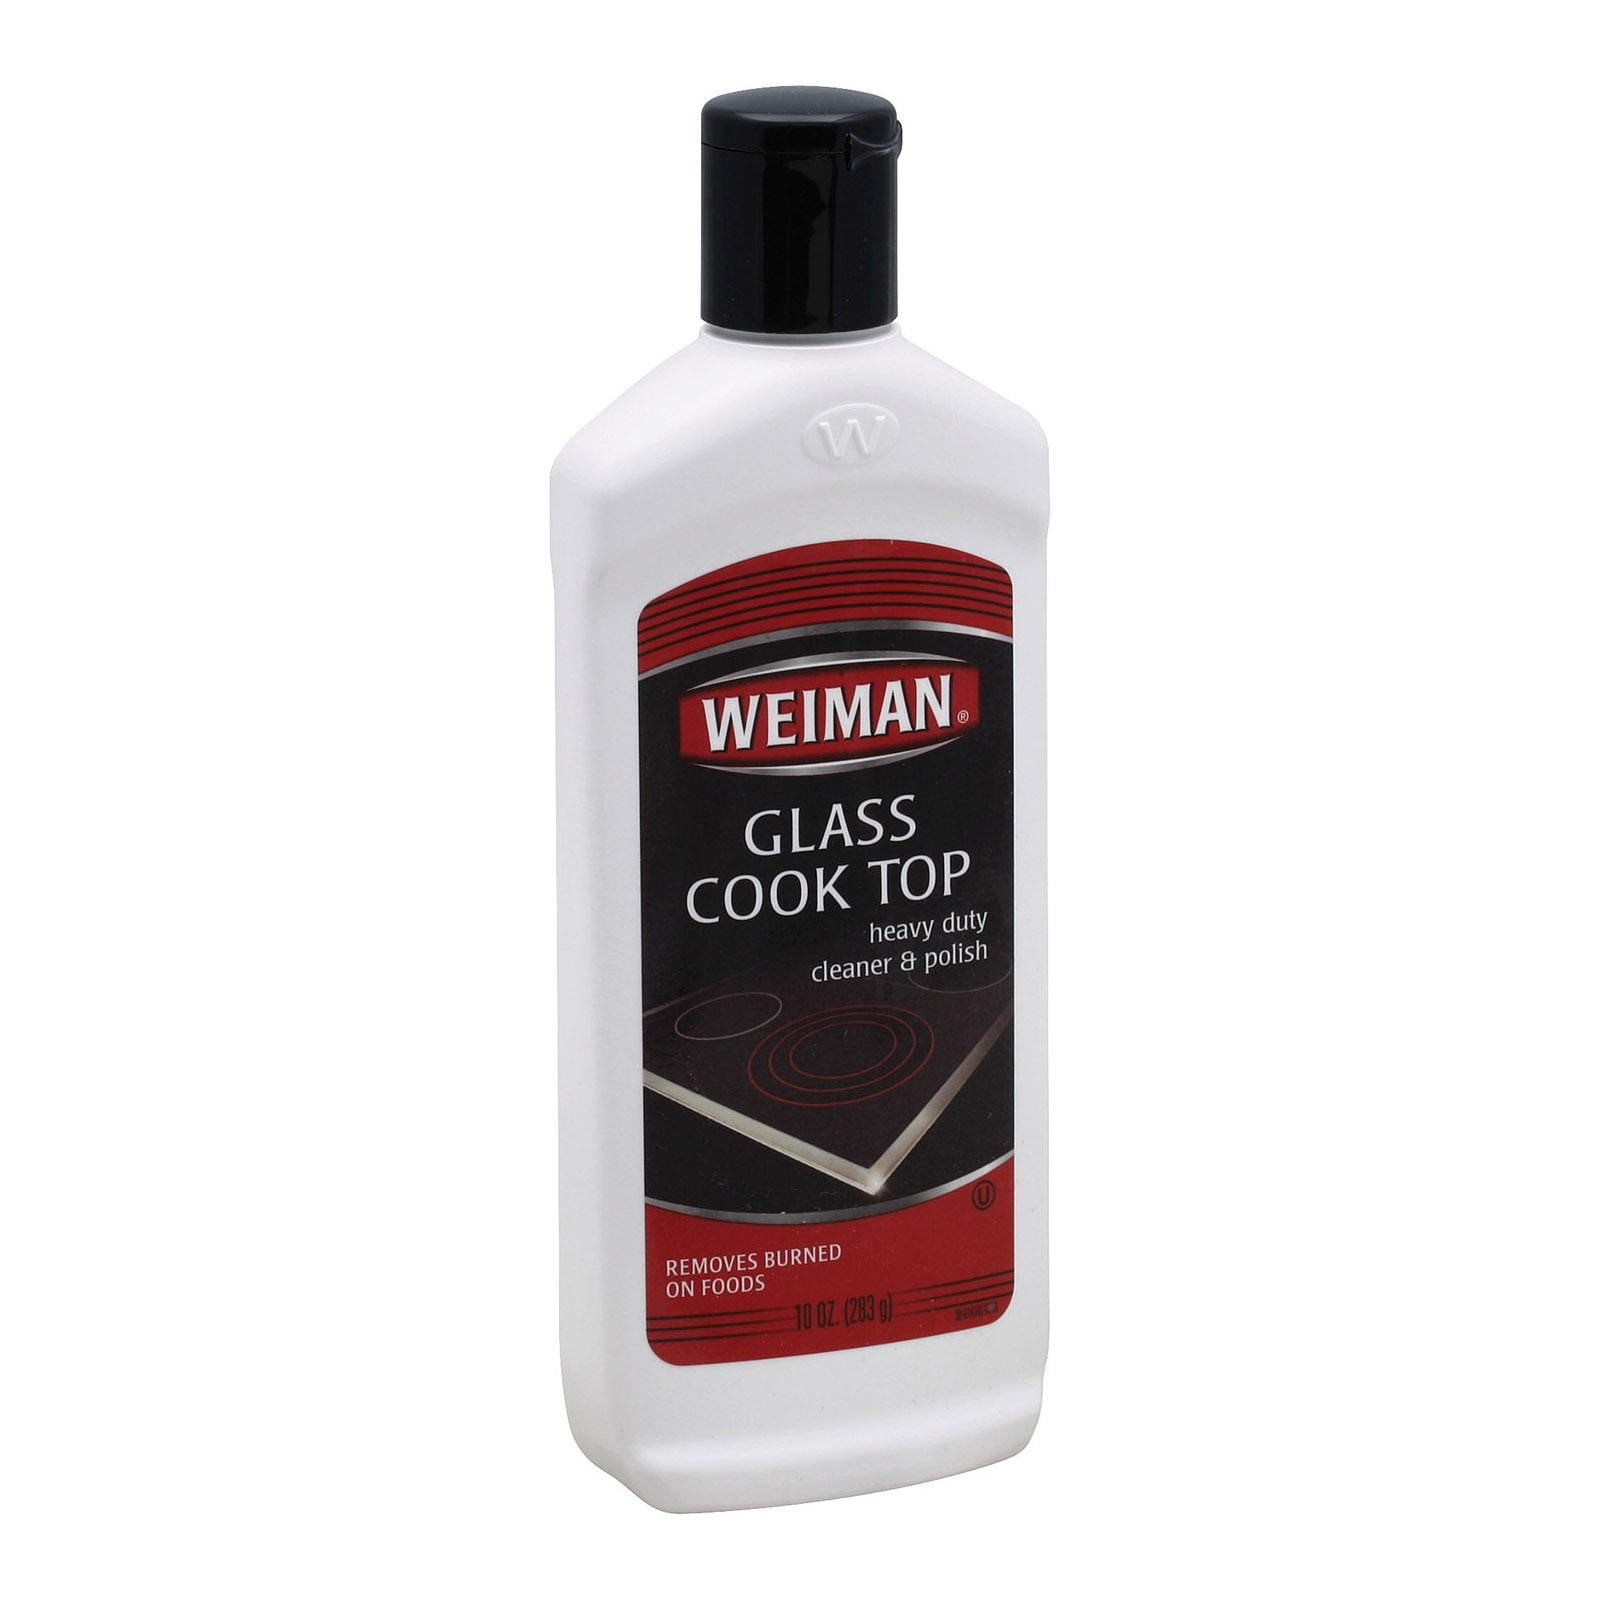 T me glass cook. Magic Glass Cooktop Cleaner. Polish Cleaner инструкция. Weiman for Glass Top.